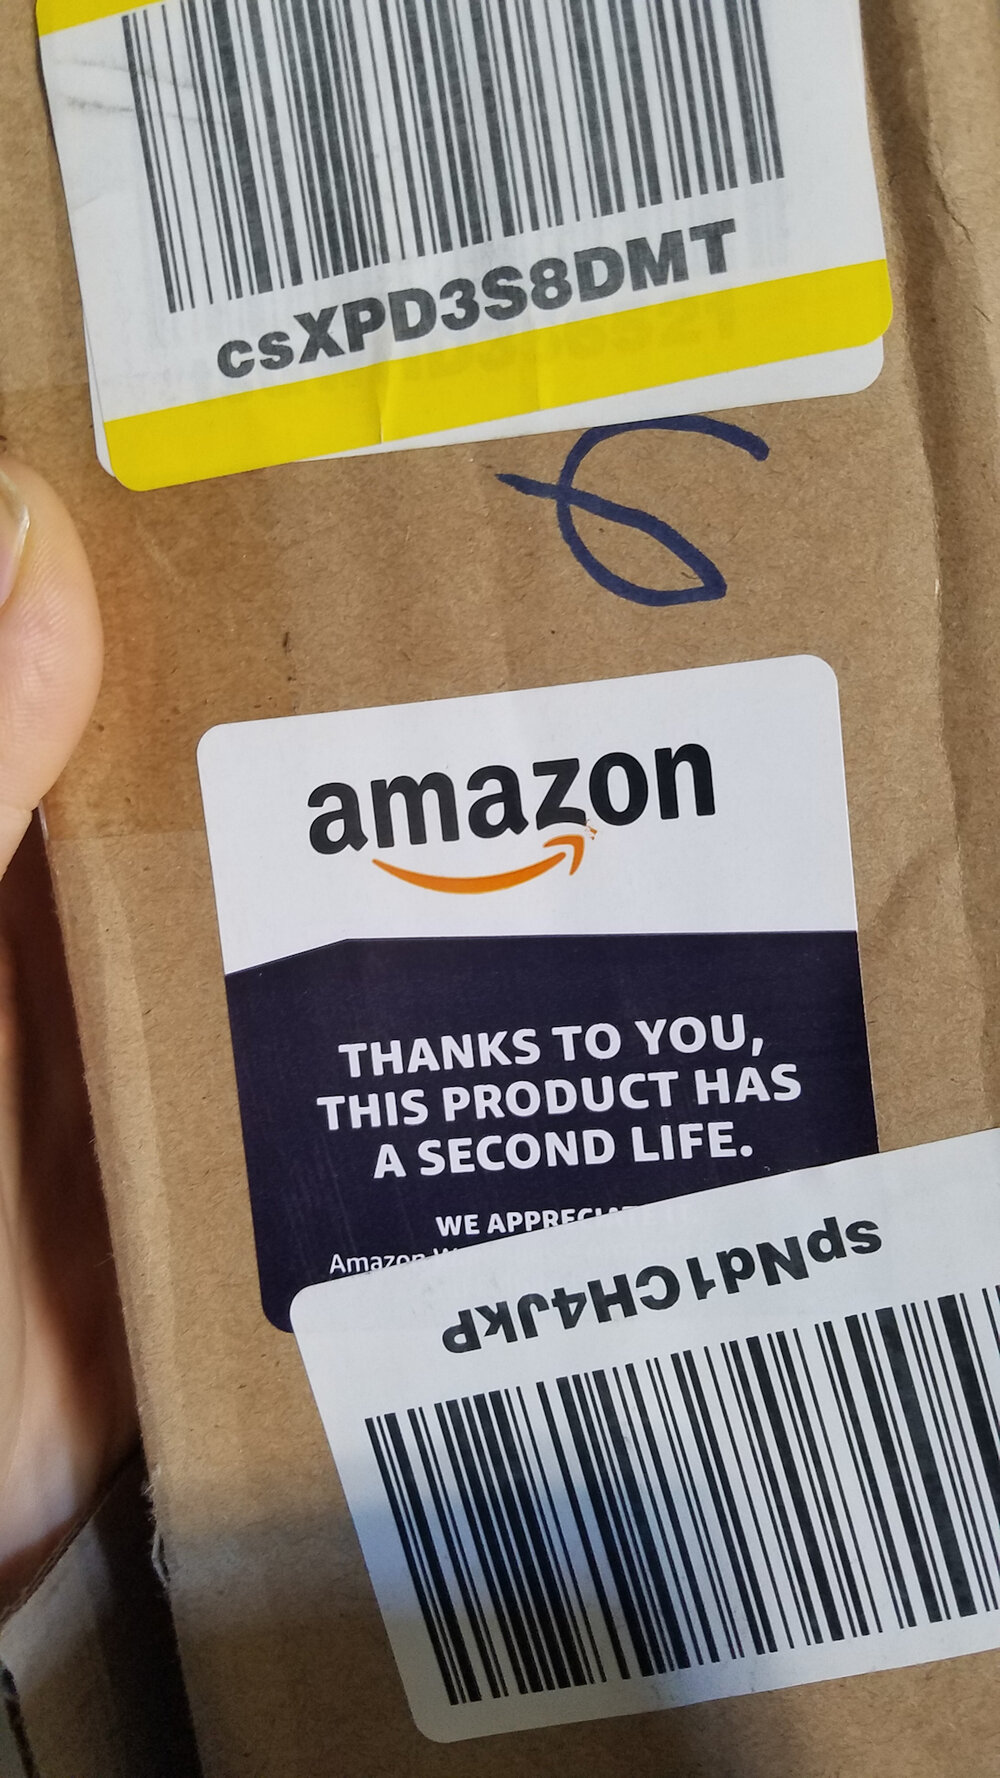 Yes, you can even buy used on Amazon!